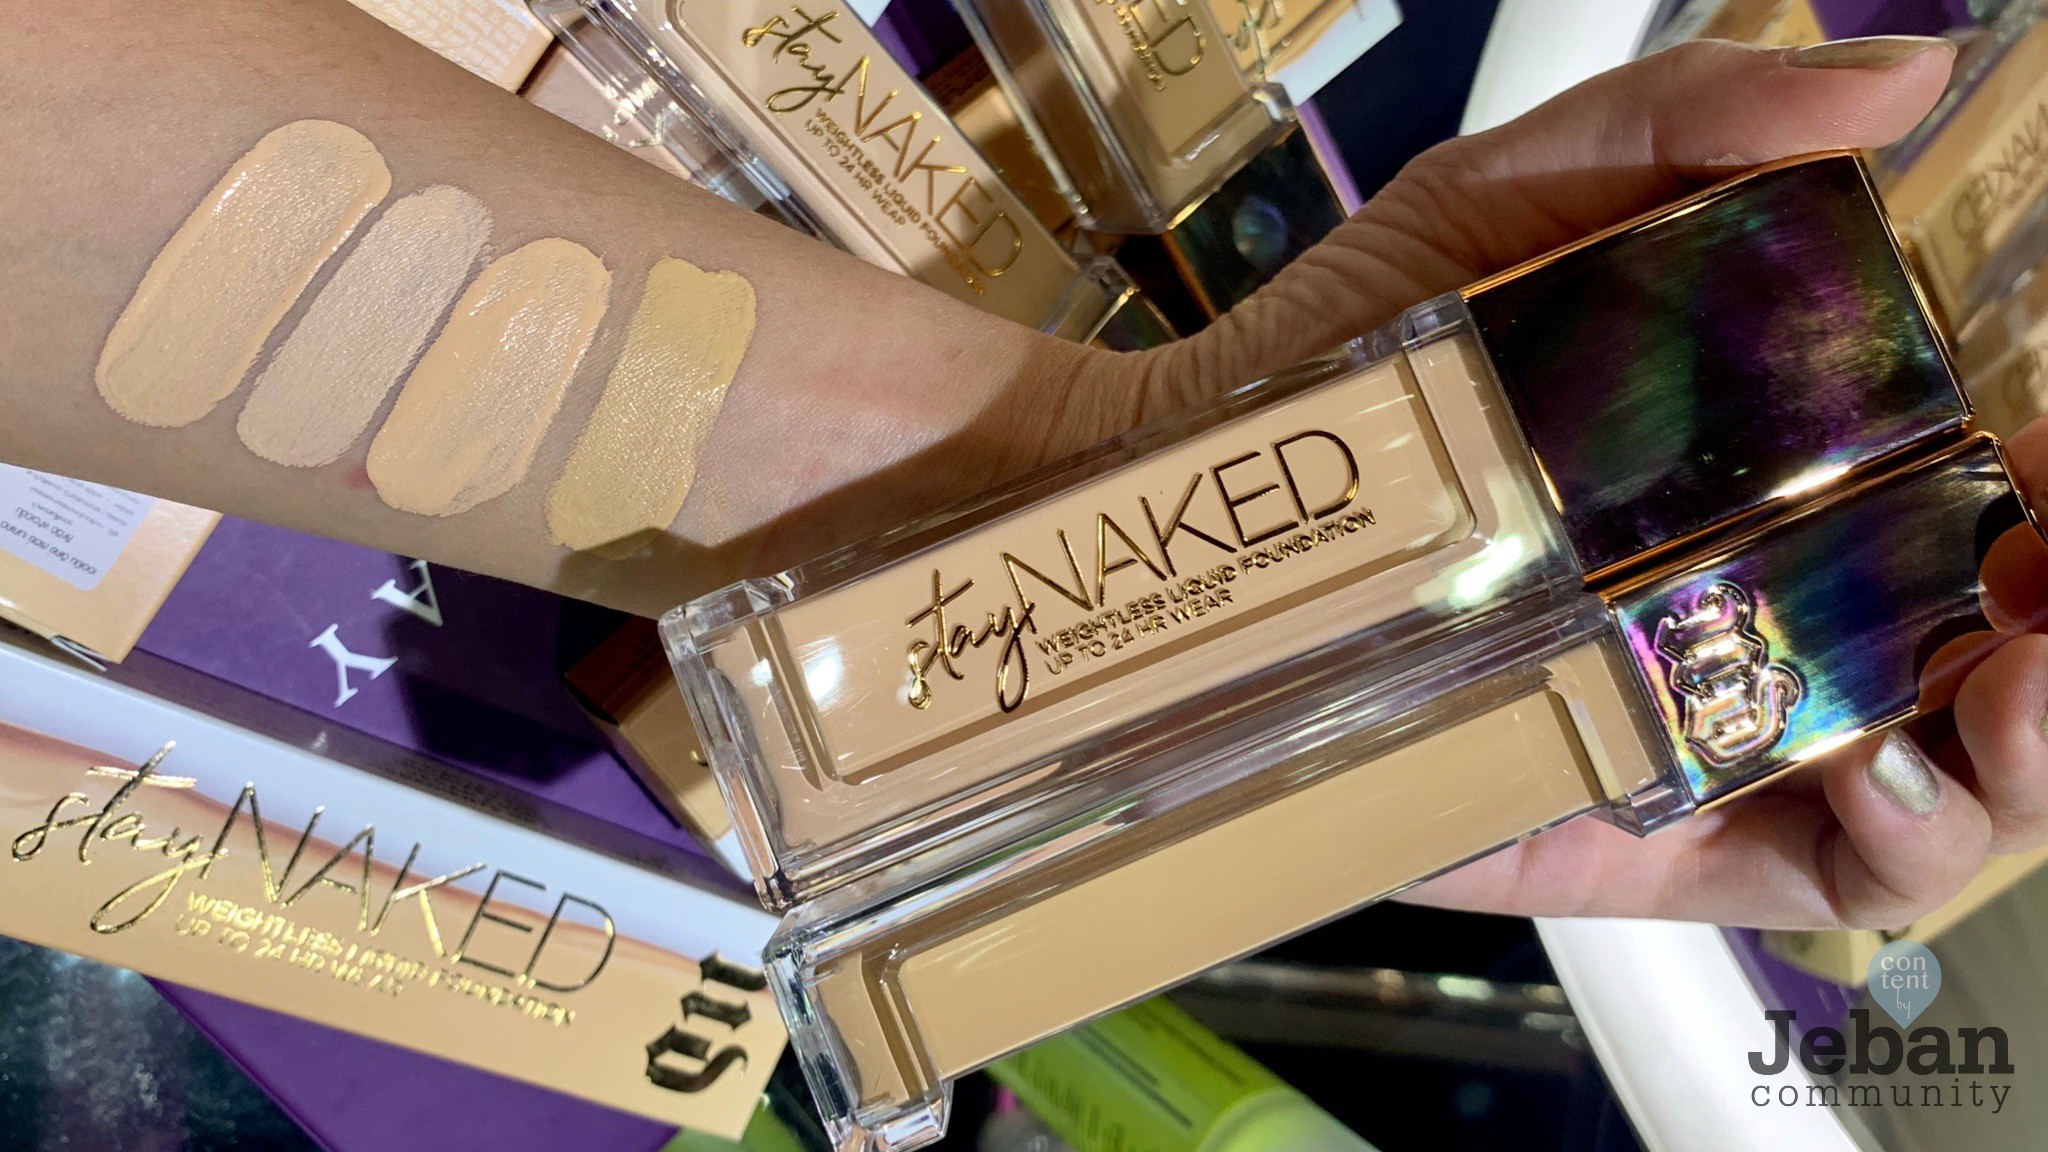 "Stay naked weightless liquid foundation urban decay". 